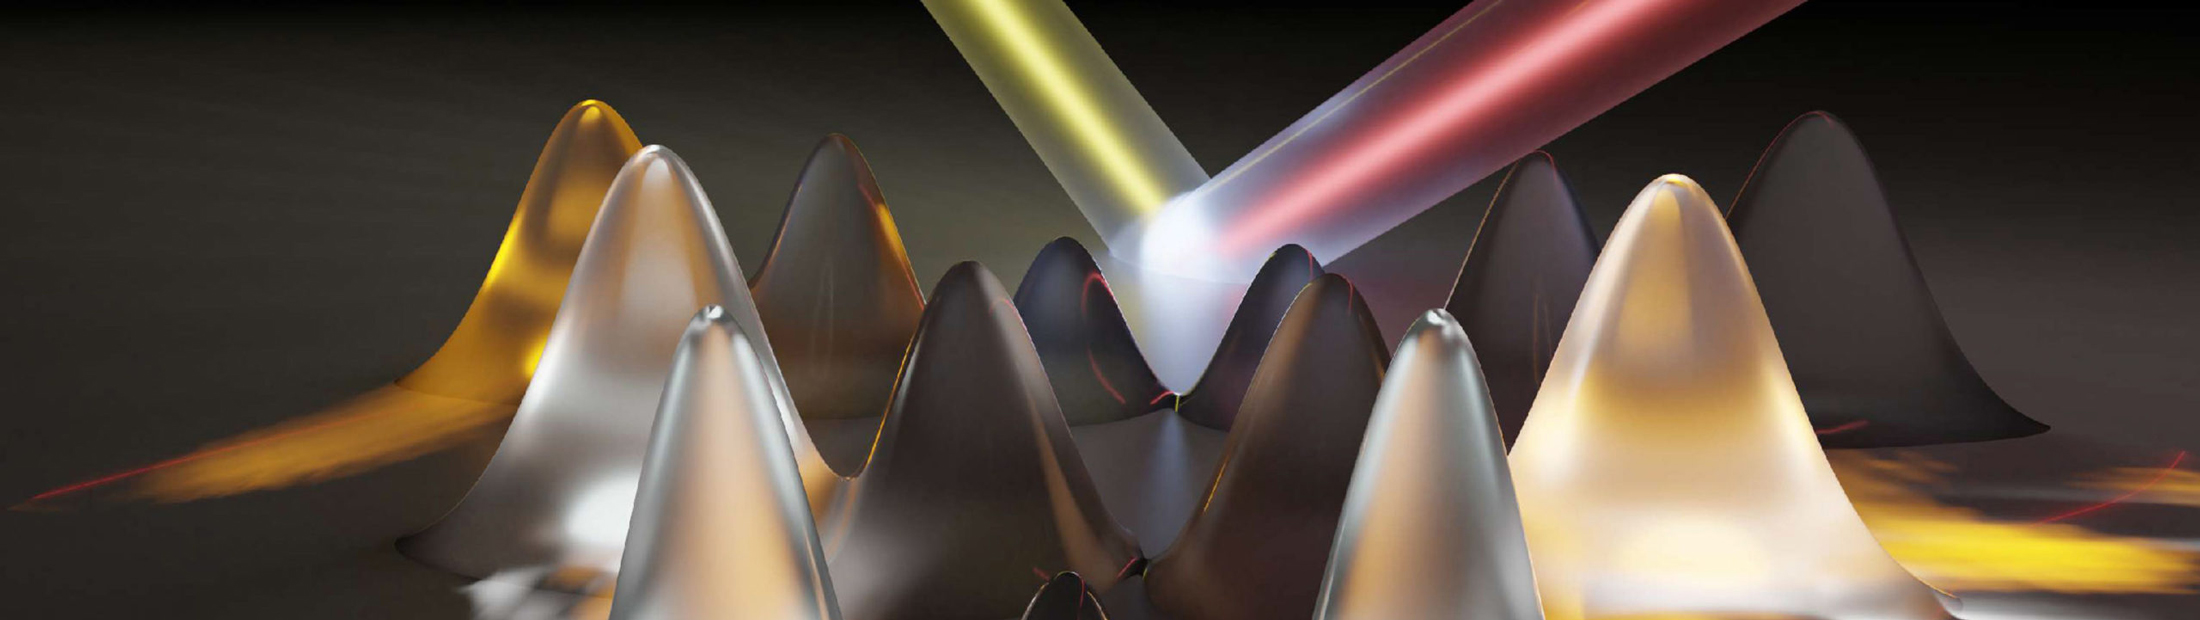 The electrons absorb laser light and set up “momentum combs” (the hills) spanning the energy valleys within the material (the red line). When the electrons have an energy allowed by the quantum mechanical structure of the material—and also touch the edge of the valley—they emit light. This is why some teeth of the combs are bright and some are dark. By measuring the emitted light and precisely locating its source, the research mapped out the energy valleys in a 2D crystal of tungsten diselenide.